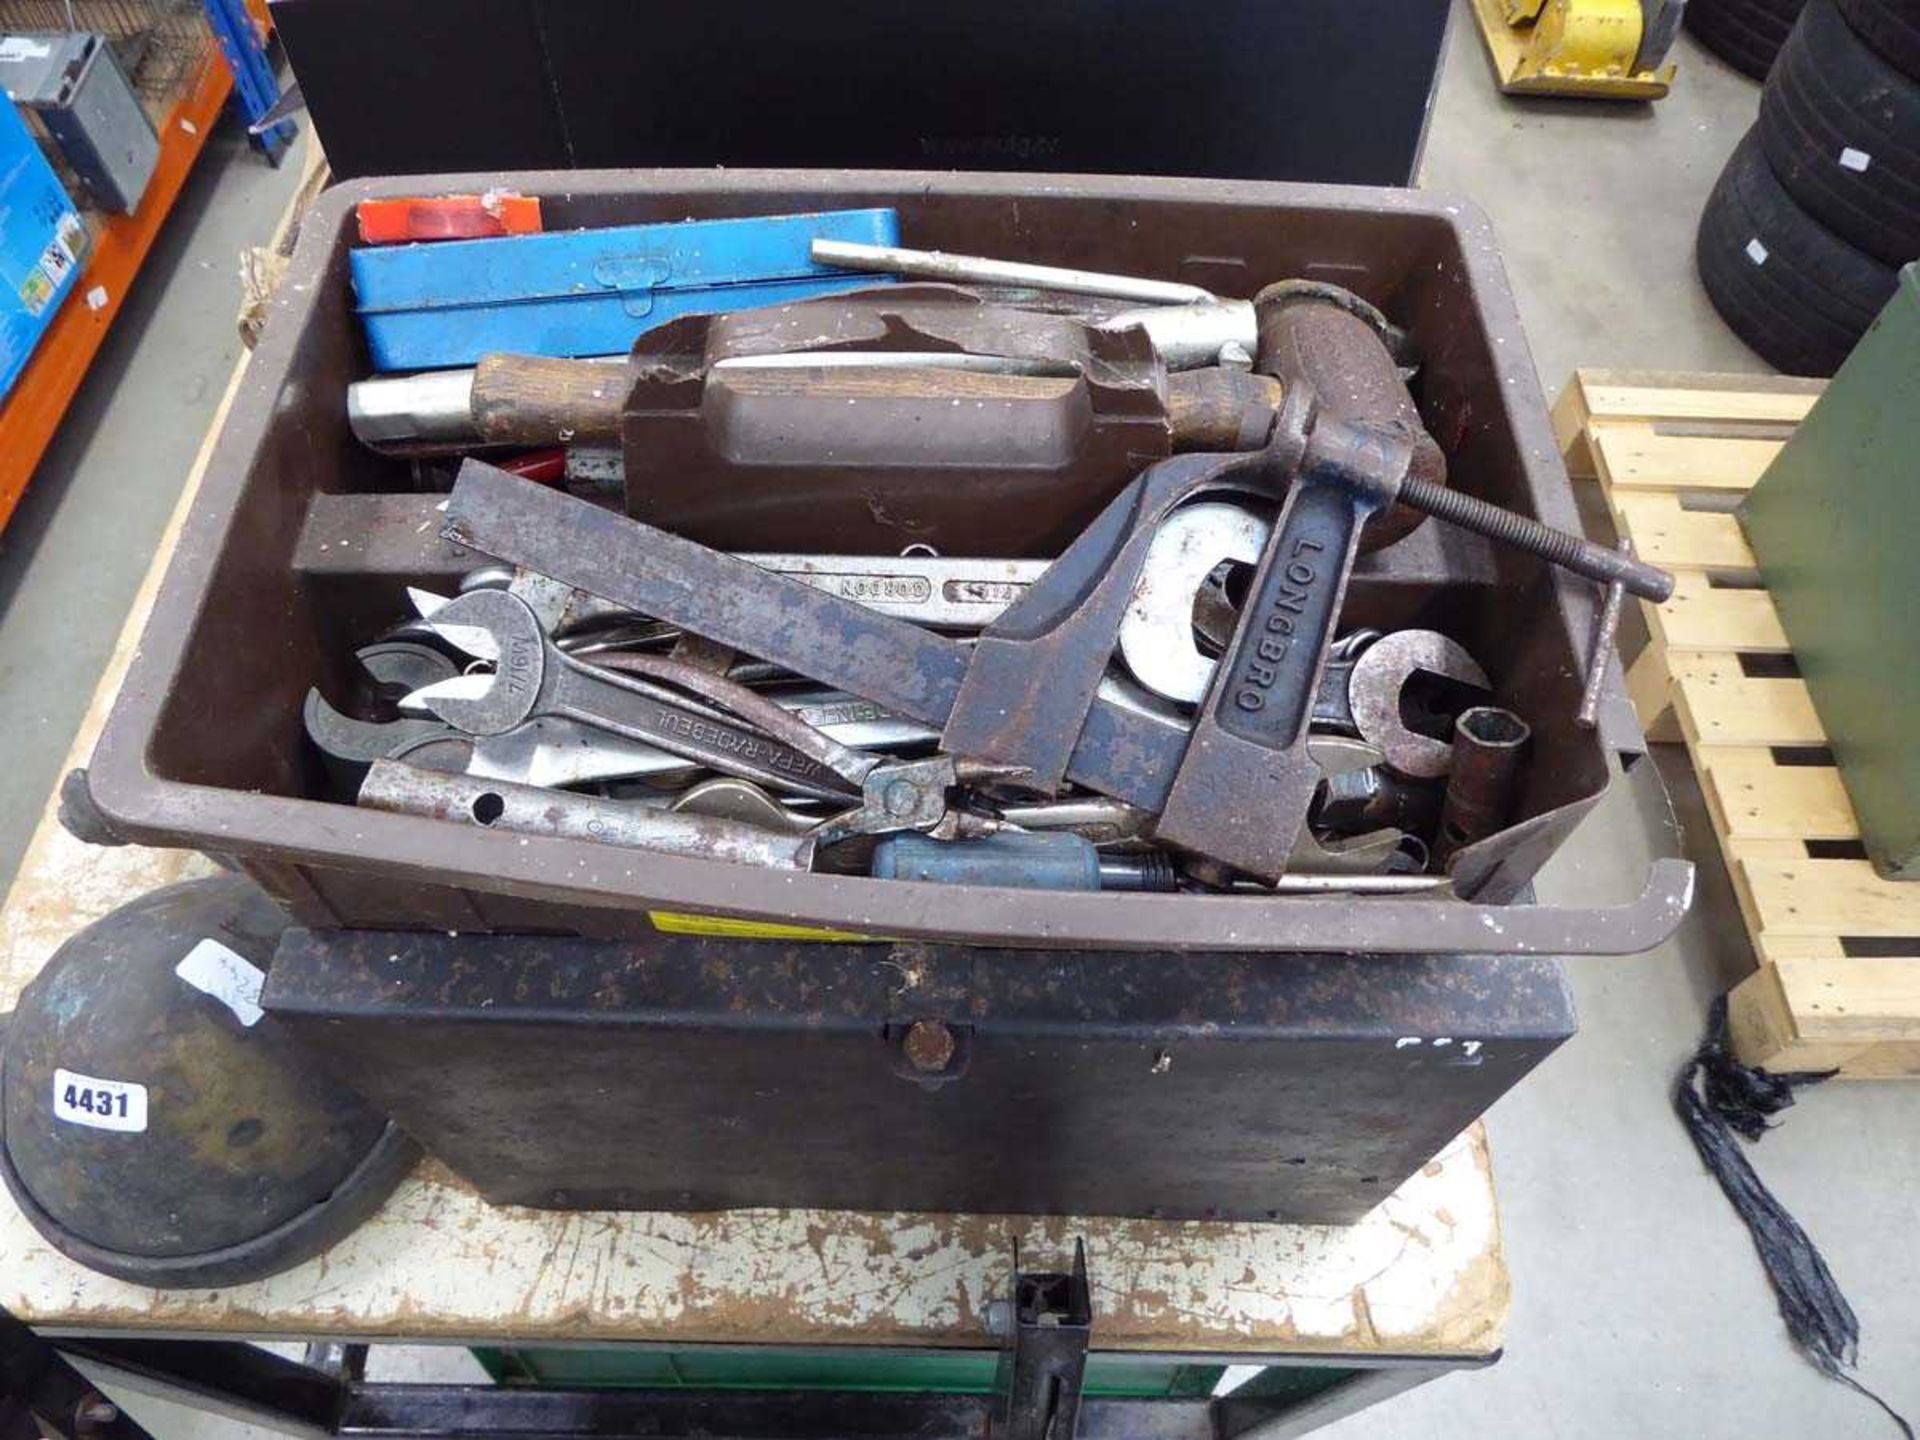 2 small boxes of tools